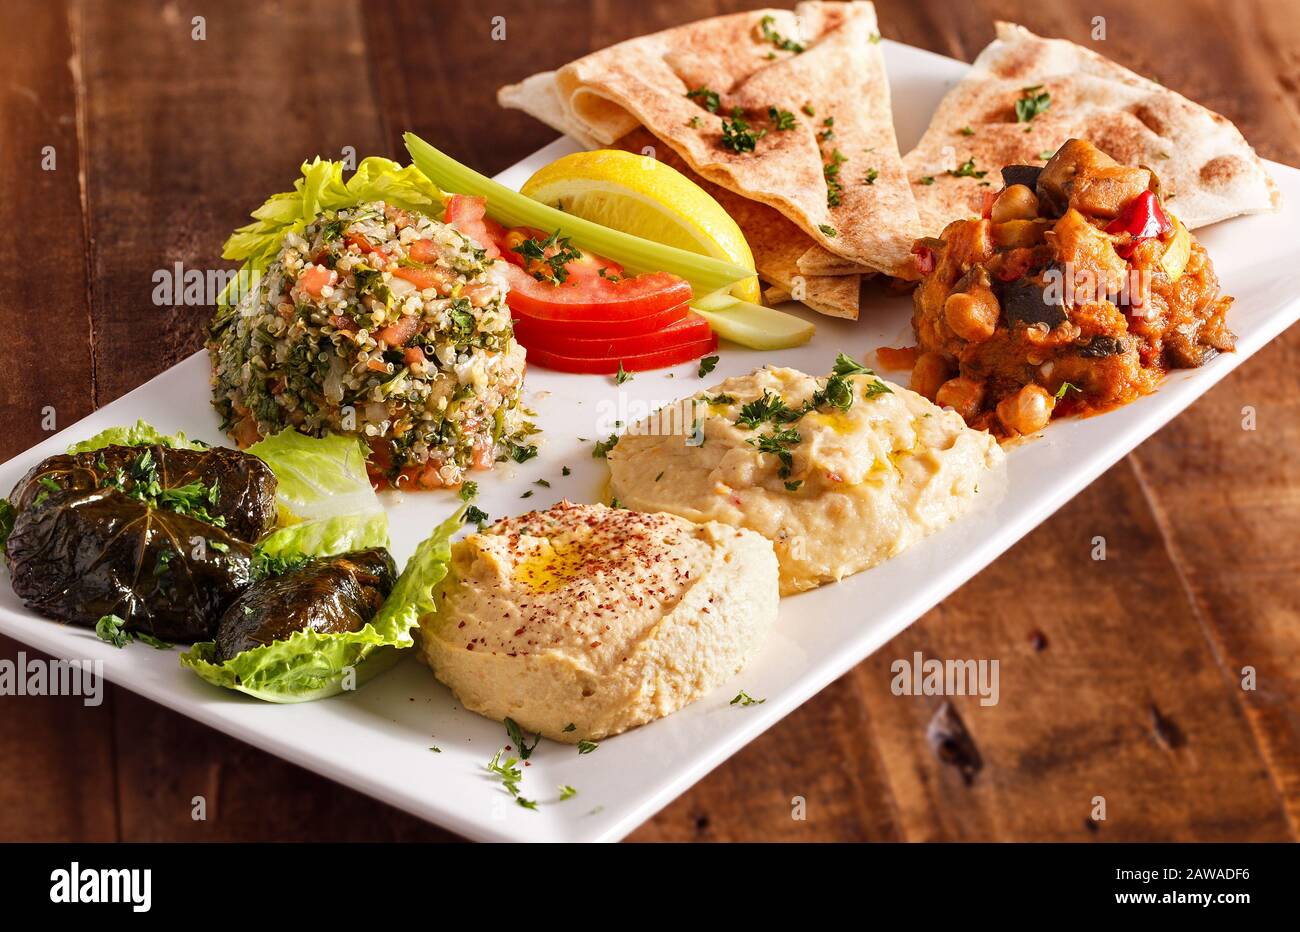 Mezze Platter with a Variety of Mediterranean Choices for Sharing Stock Photo